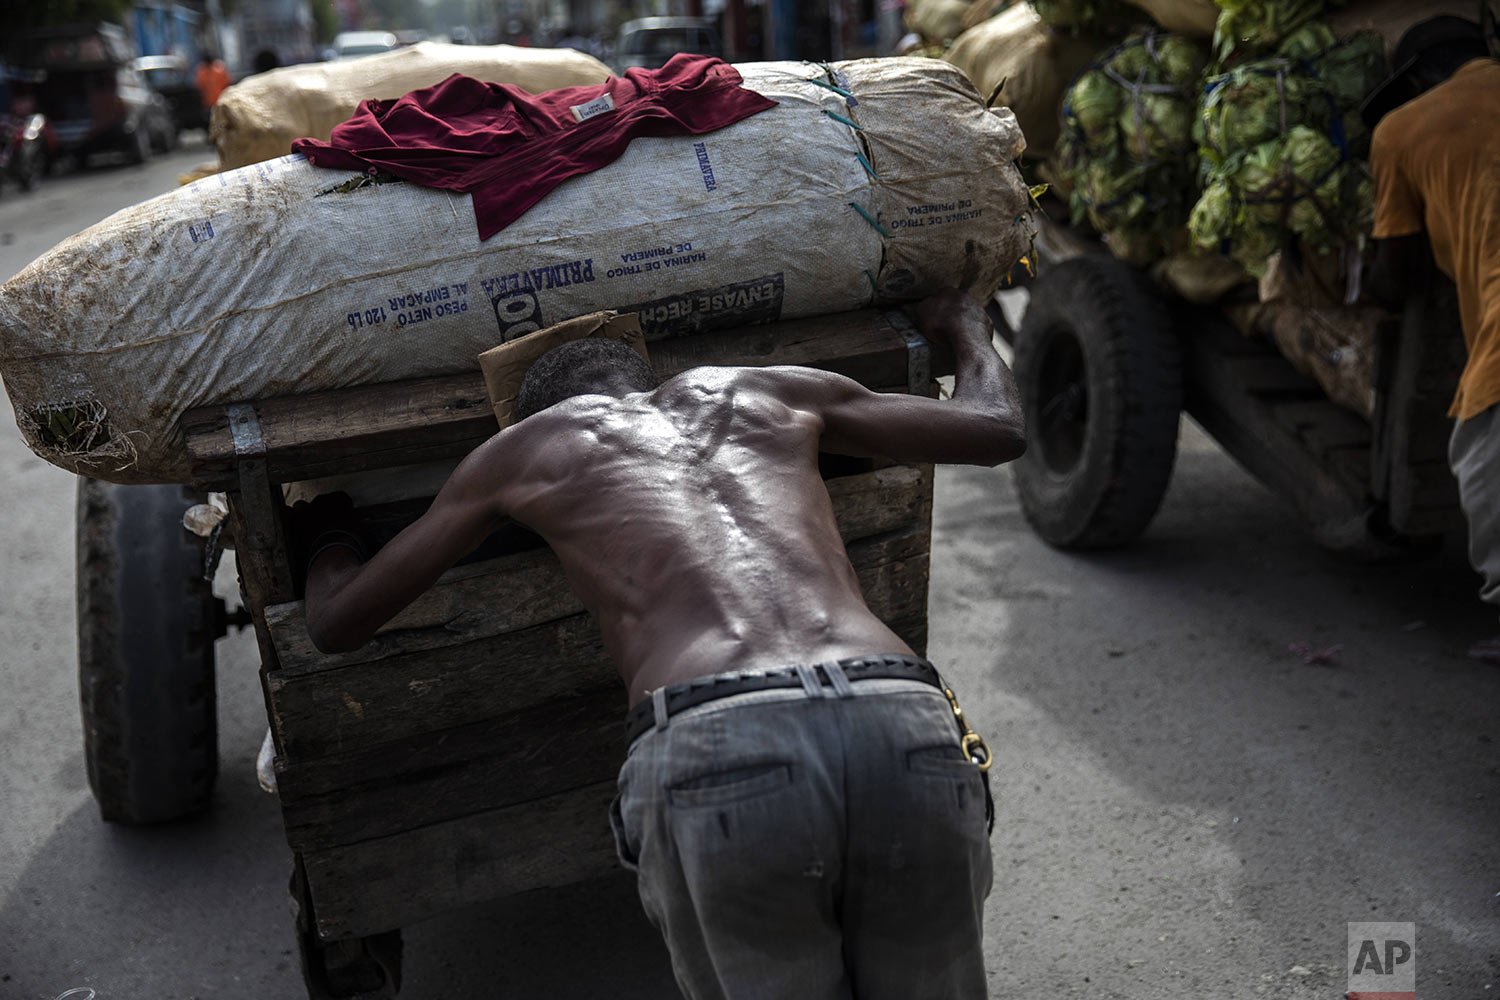  A porter pushes a loaded cart from the Croix de Bossales food market in downtown Port-au-Prince, Haiti, Oct. 4, 2021. (AP Photo/Rodrigo Abd) 